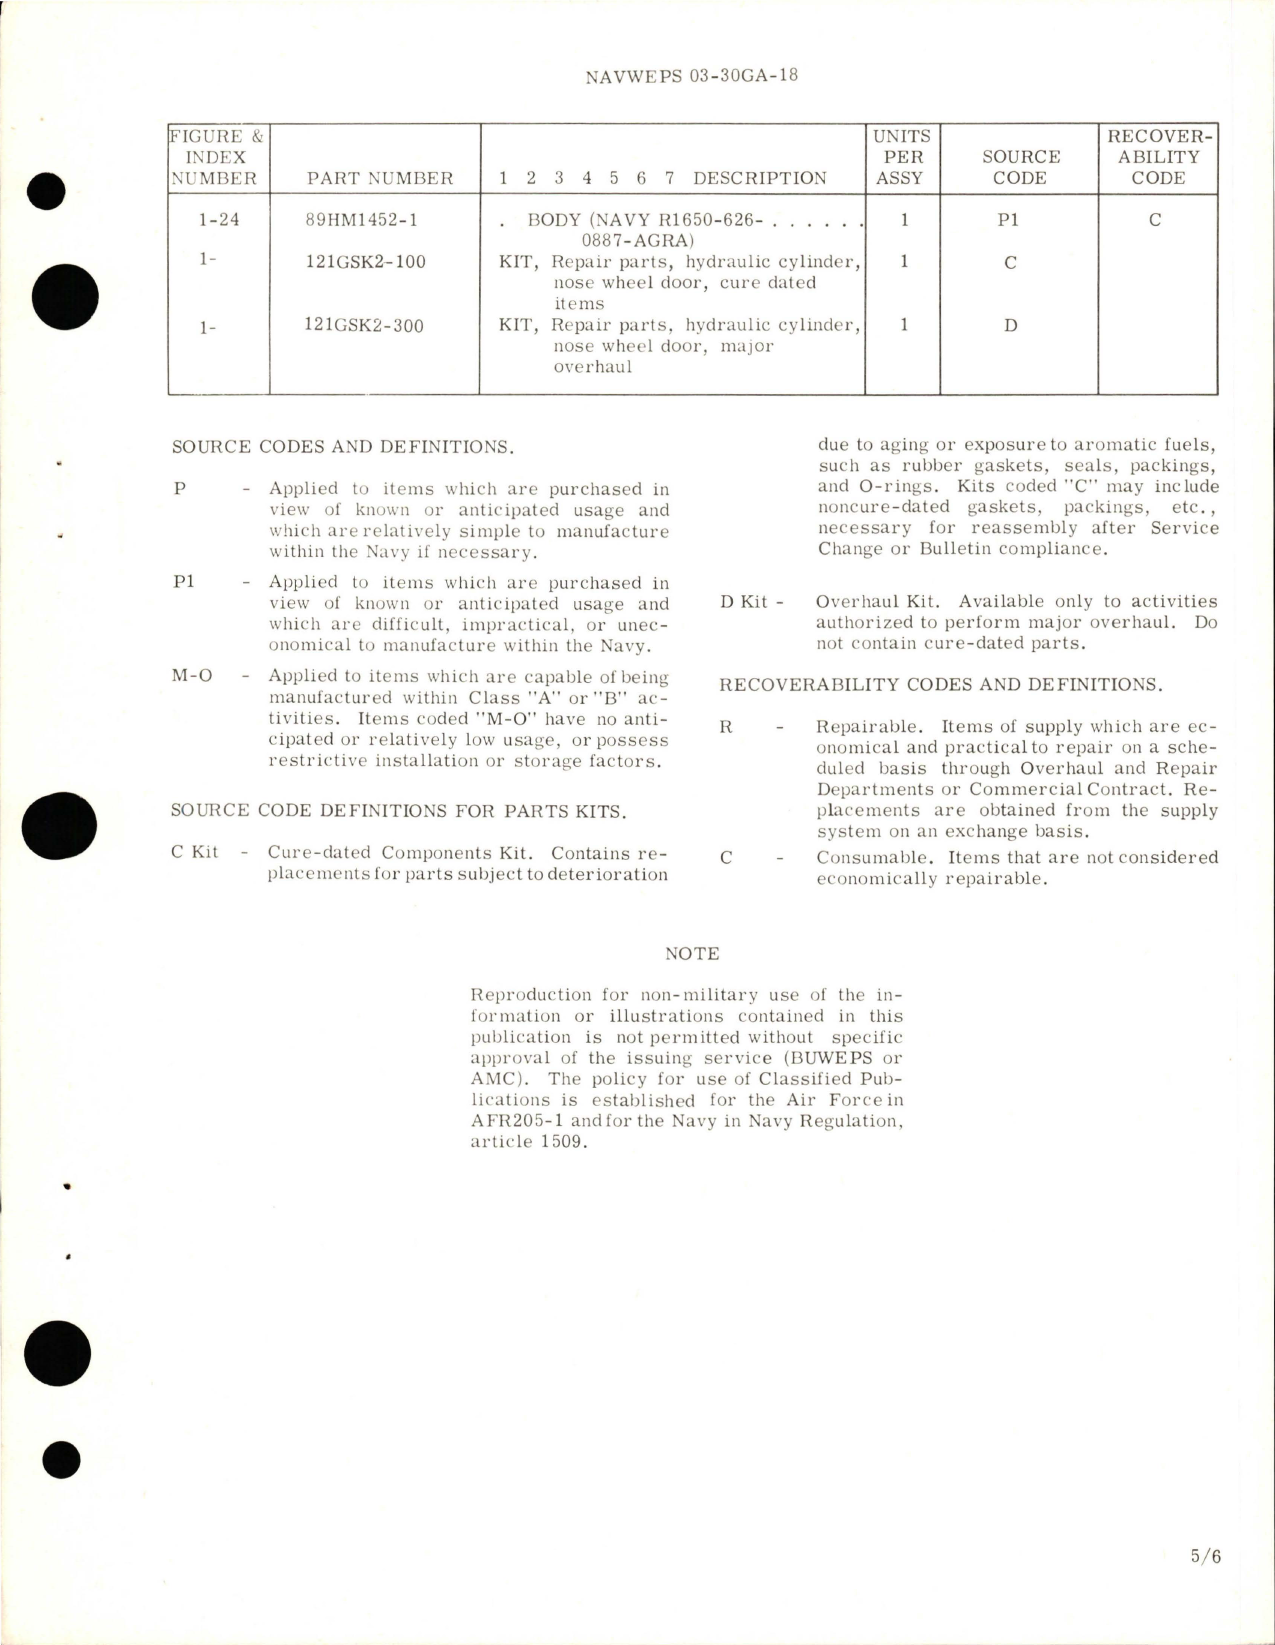 Sample page 5 from AirCorps Library document: Overhaul Instructions with Parts Breakdown for Nose Wheel Door Cylinder Assembly - 89H1054-7